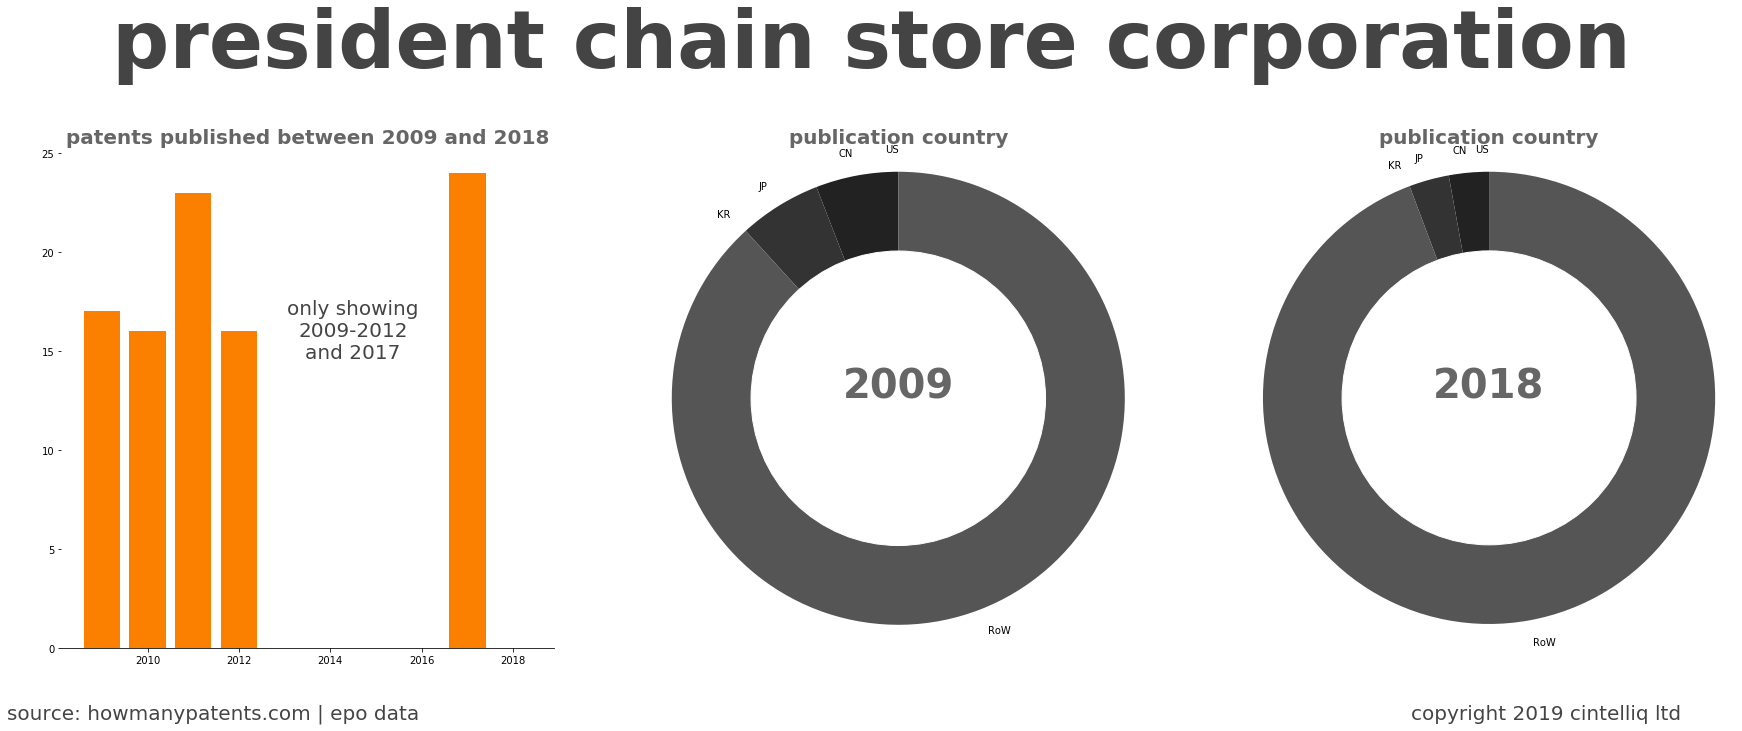 summary of patents for President Chain Store Corporation